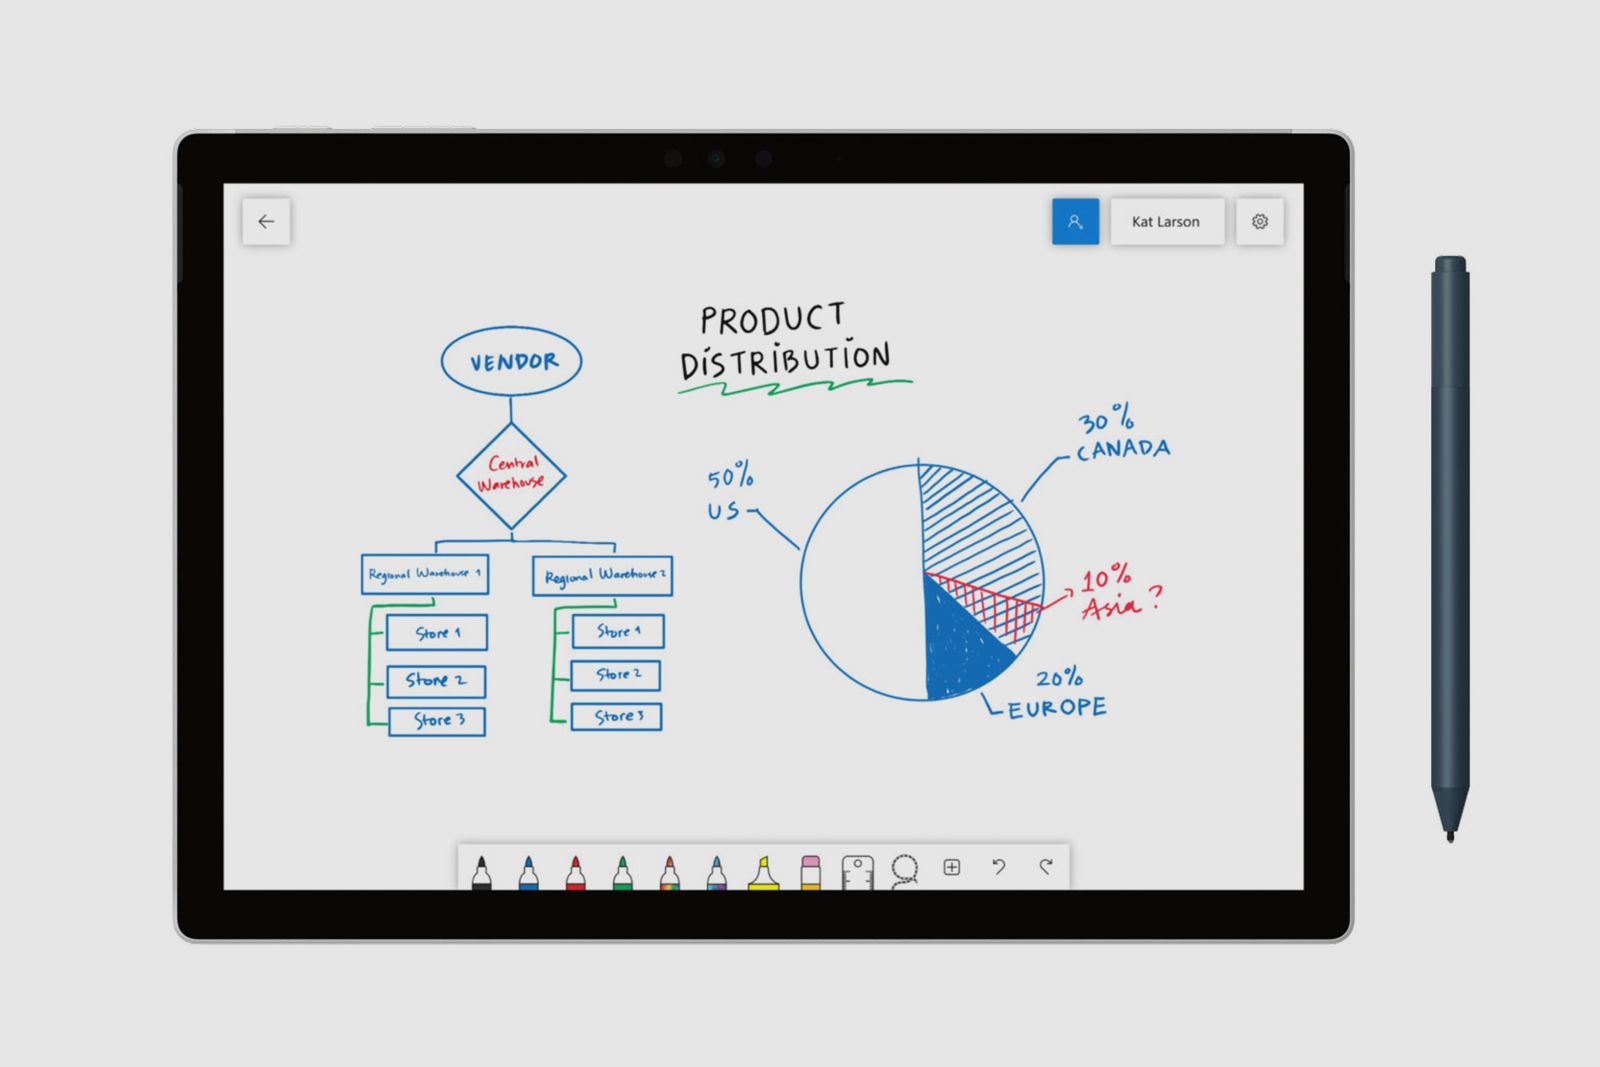 Microsofts Whiteboard app thats now out lets you collaborate with others image 1